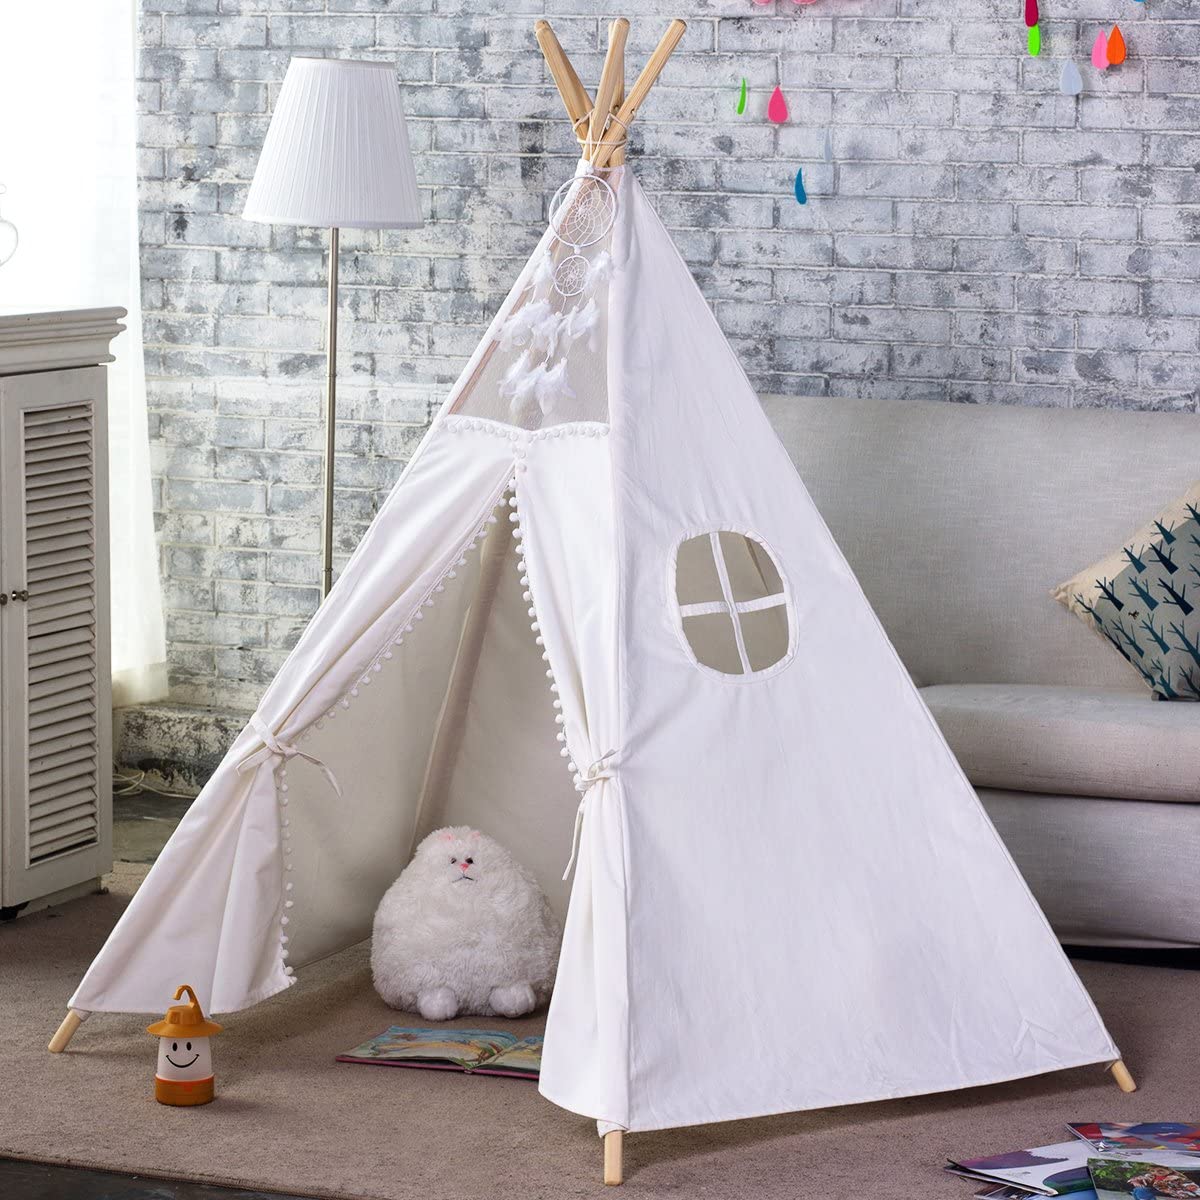 5 Poles Giant Kids Teepee Tent (Natural Canvas) | Auzzi Store